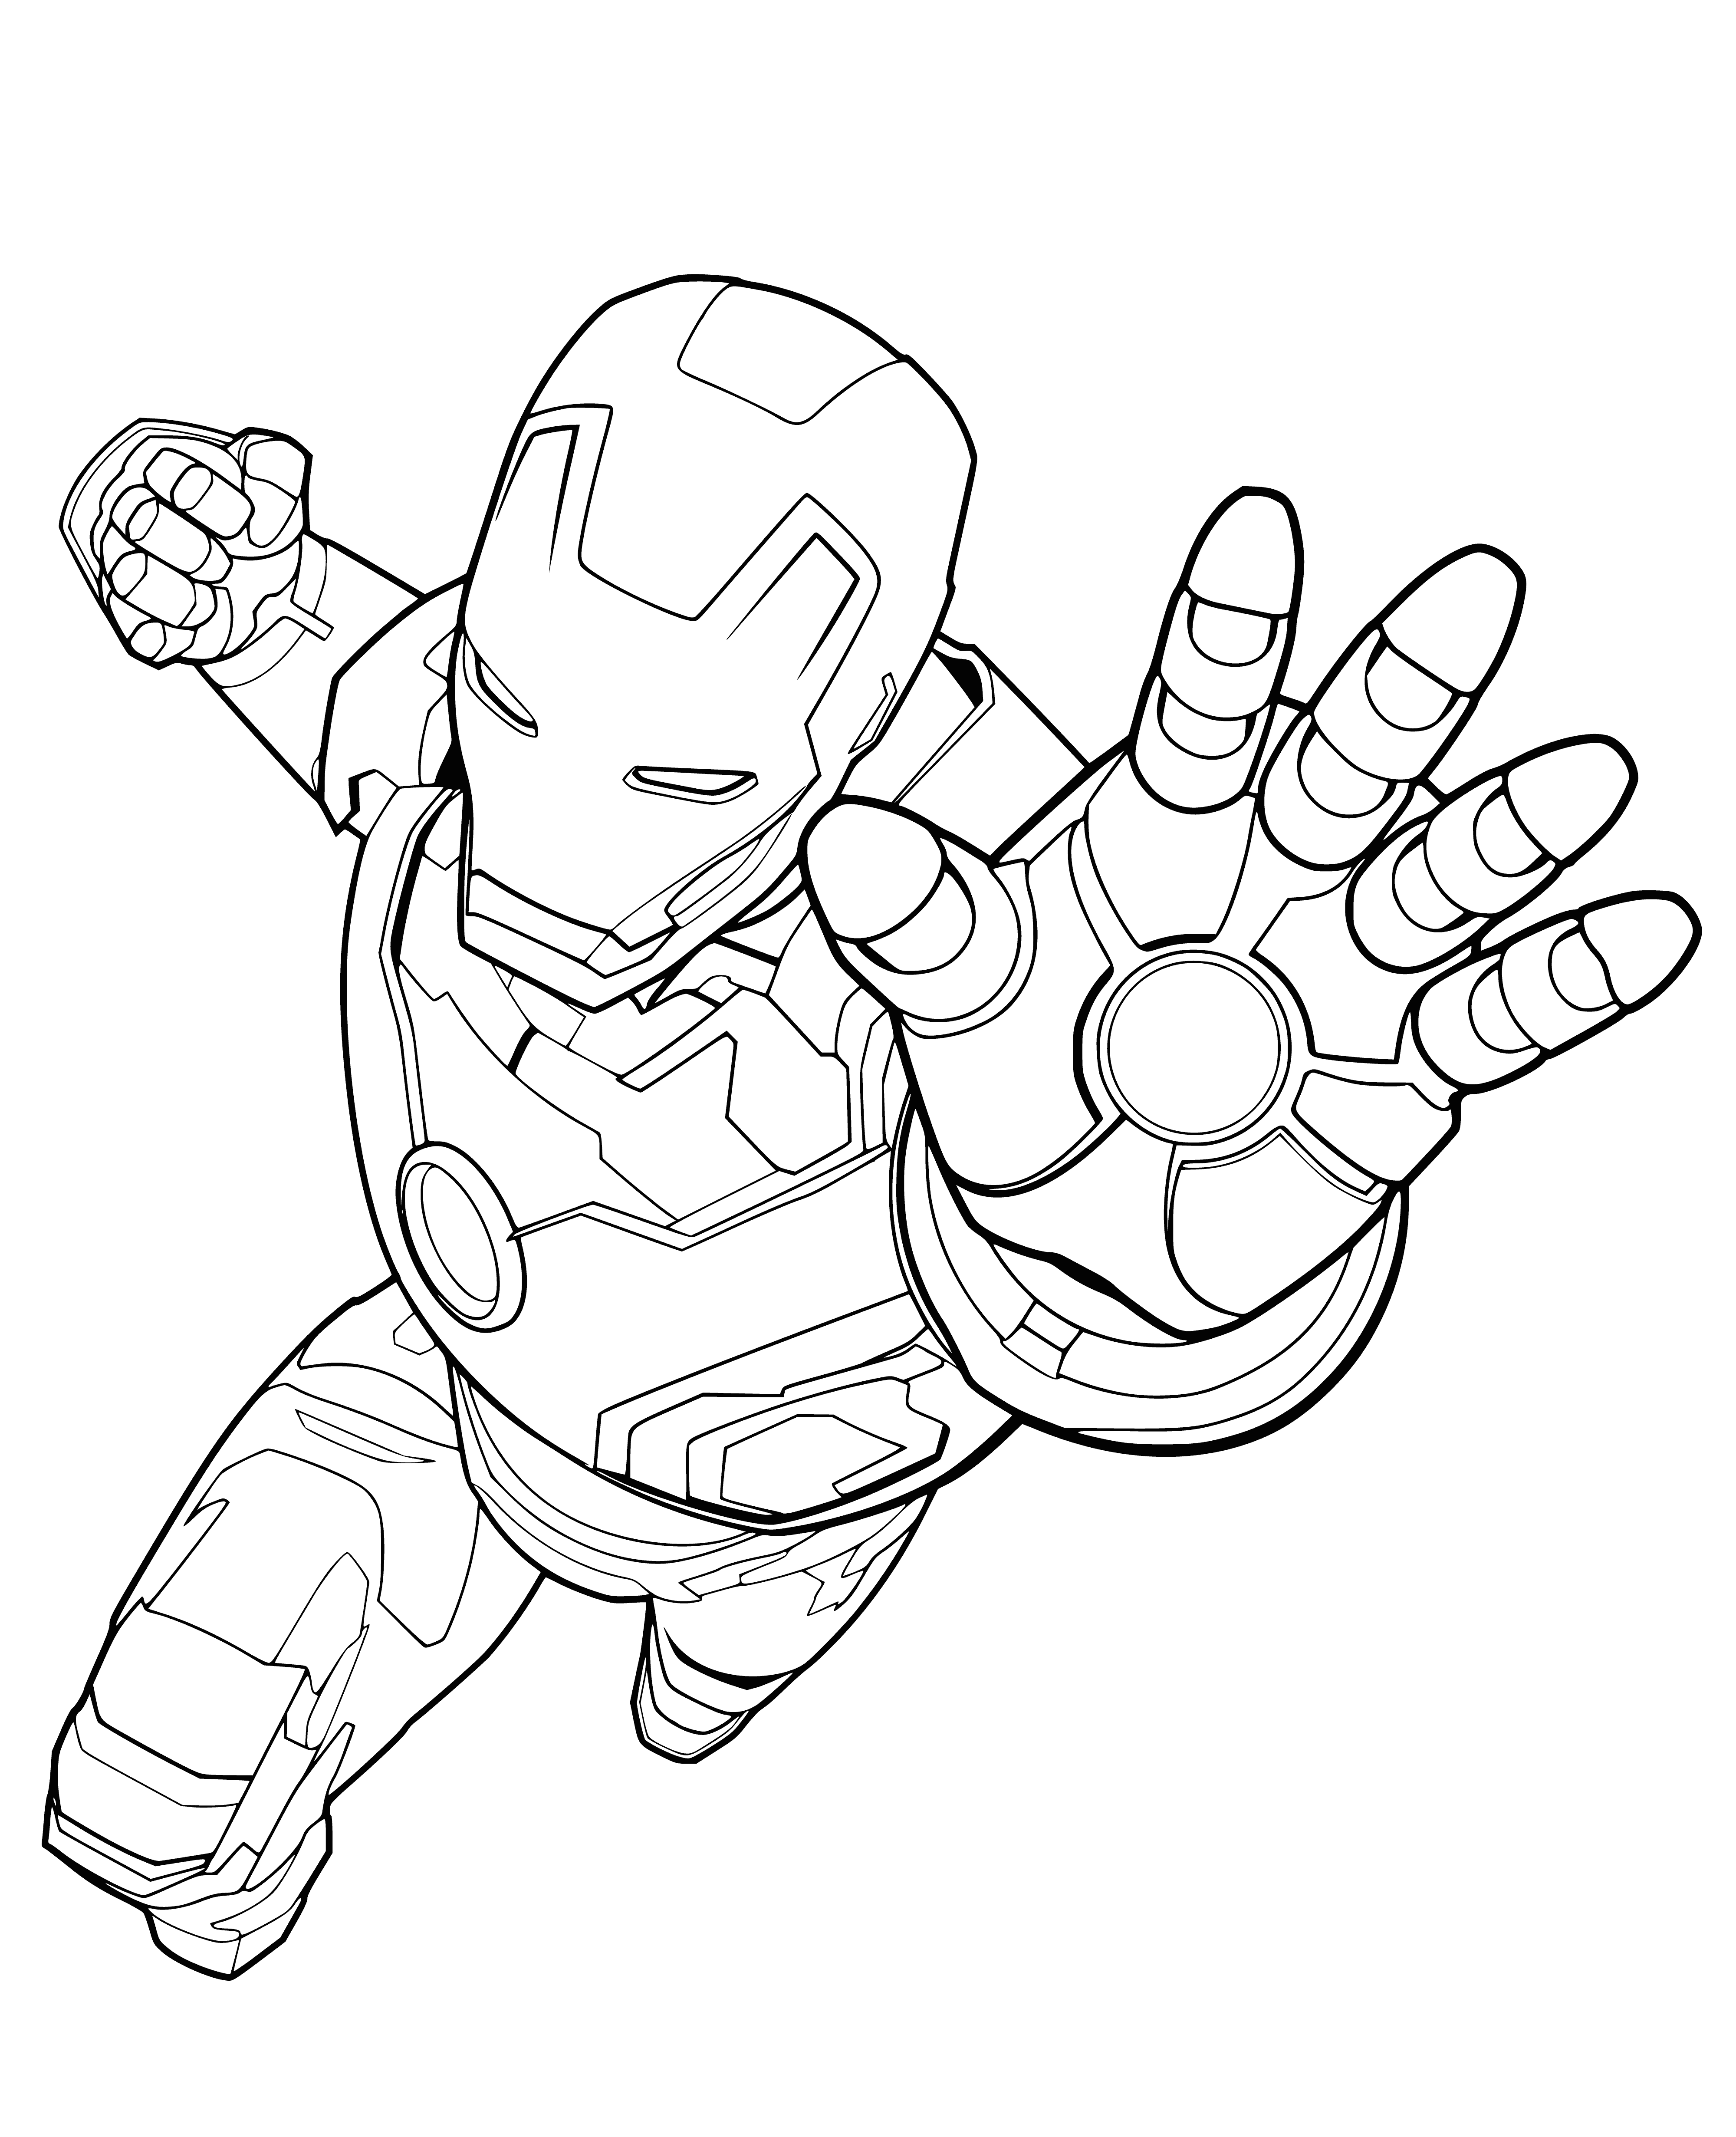 coloring page: Man in a red and gold metal suit flies through air on jetpack, shooting something unseen.